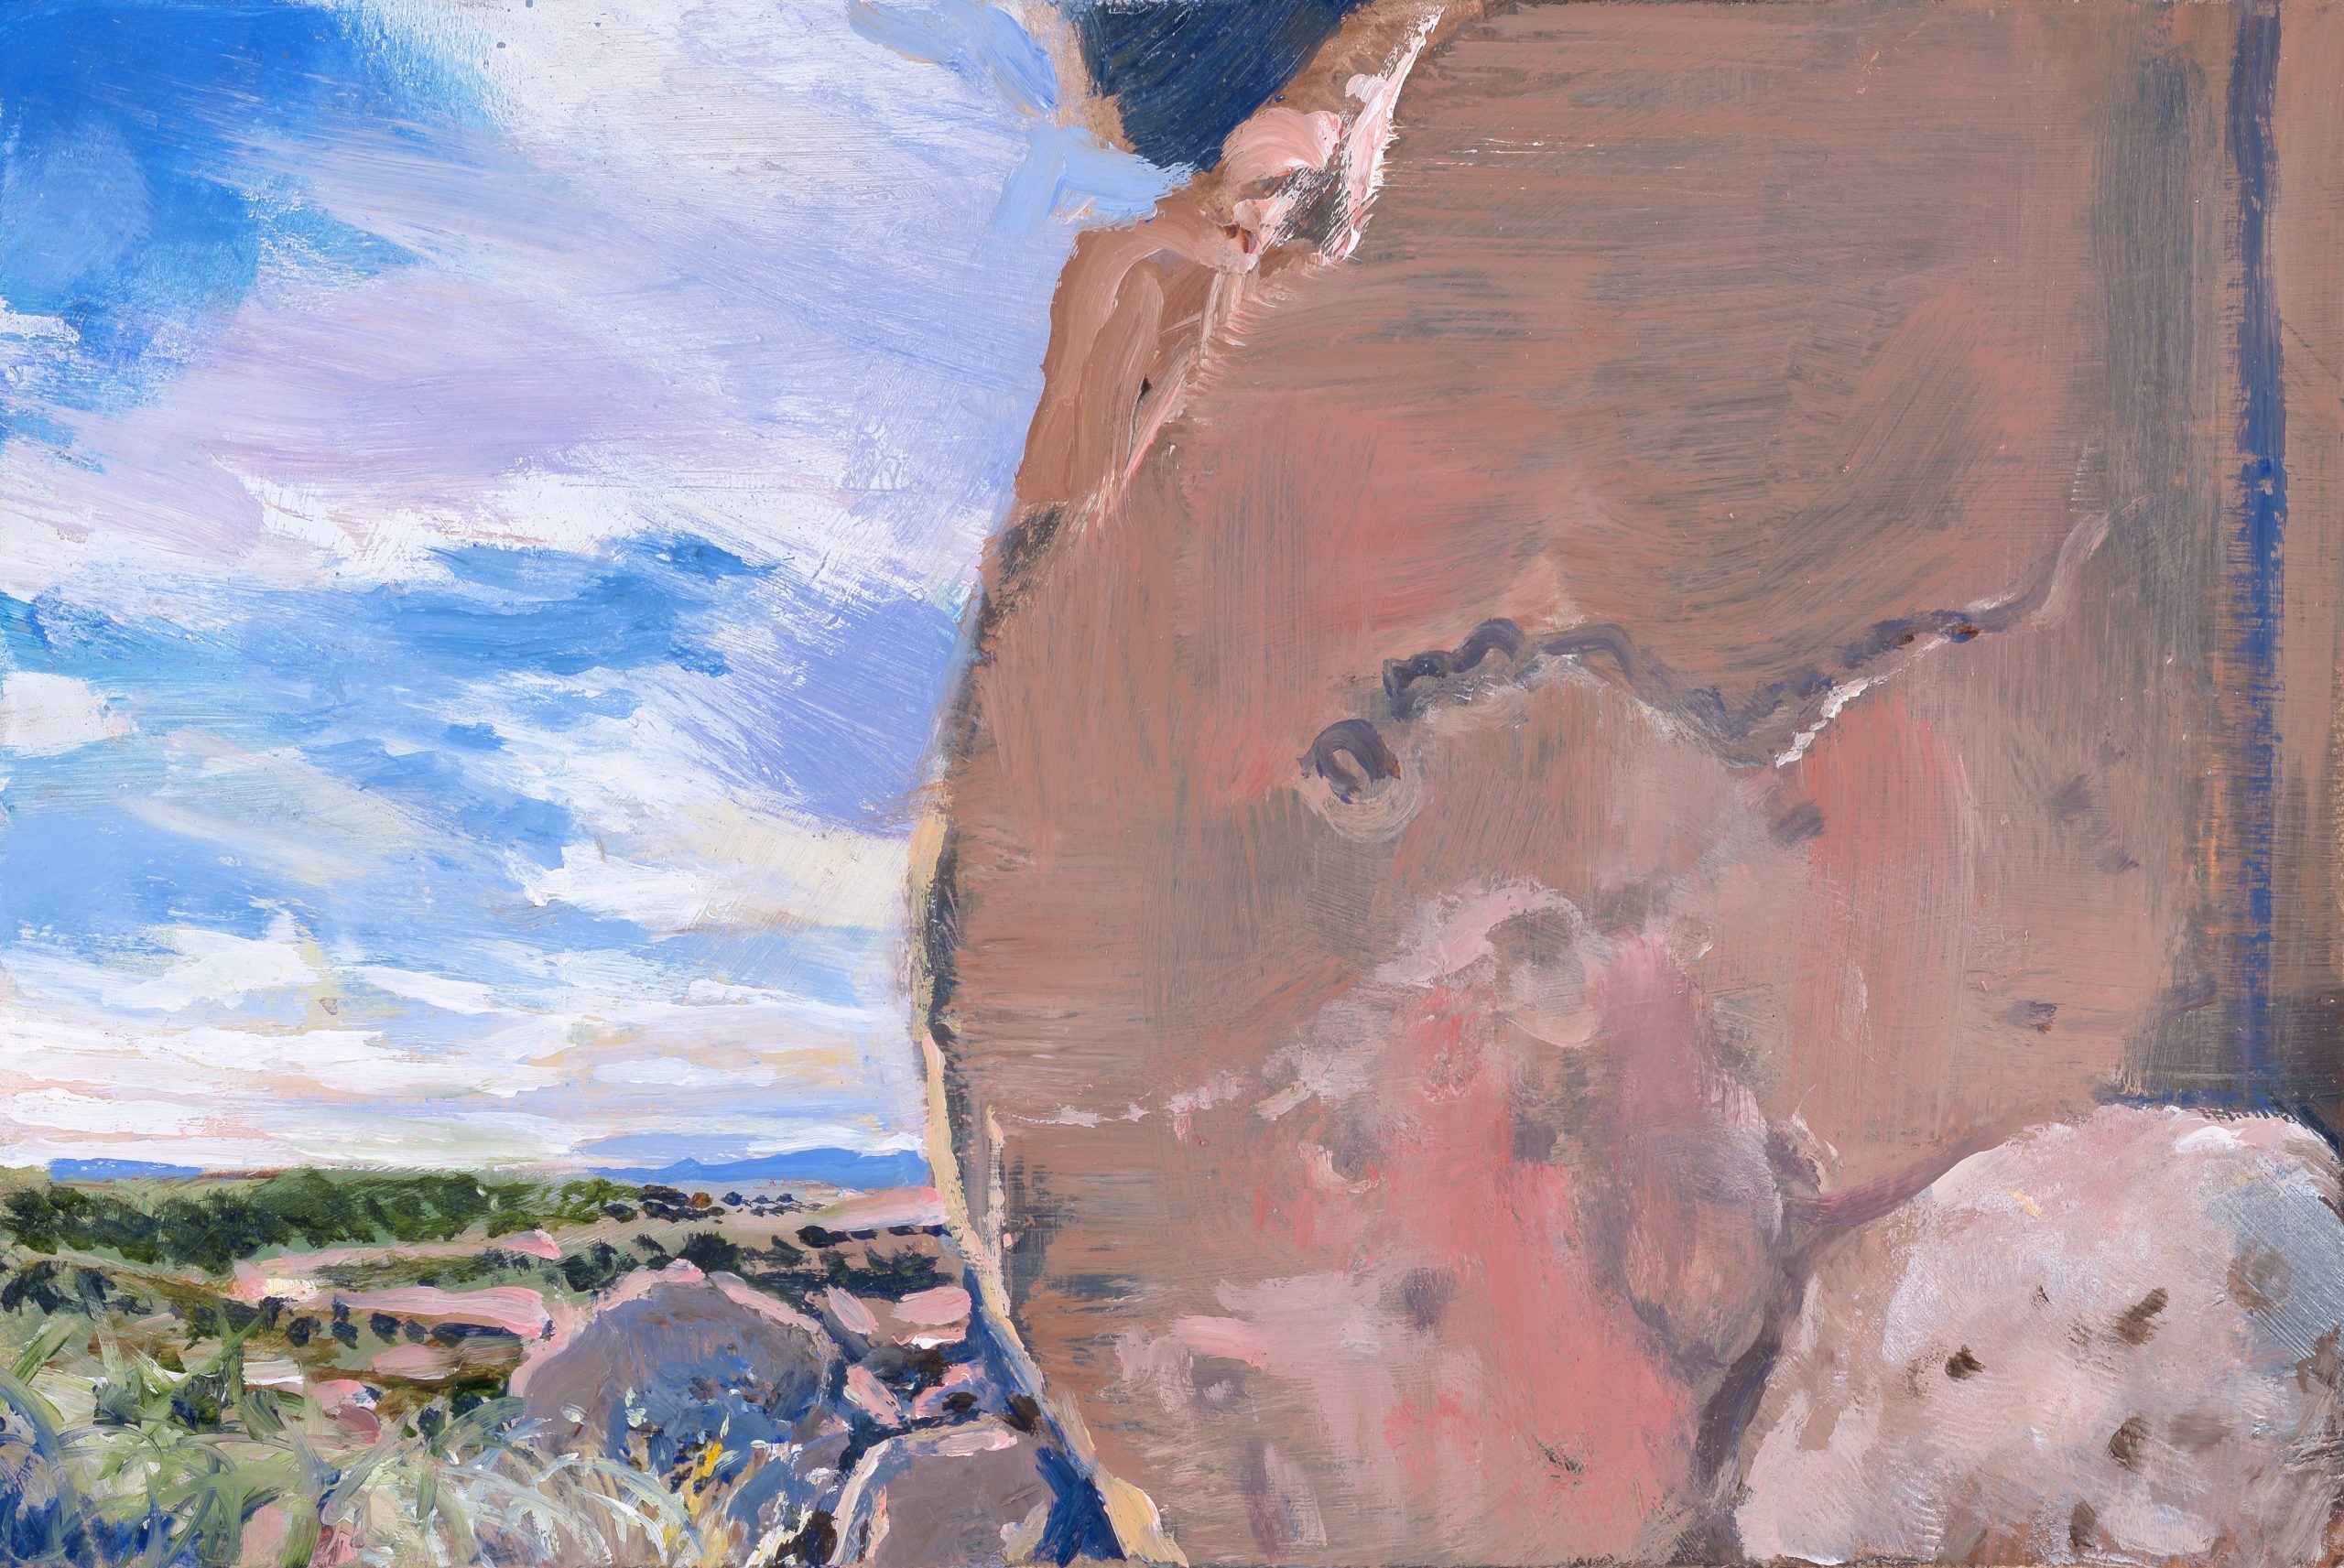 

											Don Stinson</b>

											<em>
												Beyond the Romantic</em> 

											<h4>
												Santa Fe: September 9 – November 26, 2022											</h4>

		                																																													<i>Tsankawi Ruins Trail, the view from a sacred place,</i>  
																																								2022, 
																																								oil on copper, 
																																								4 x 6 inches 
																								
		                				